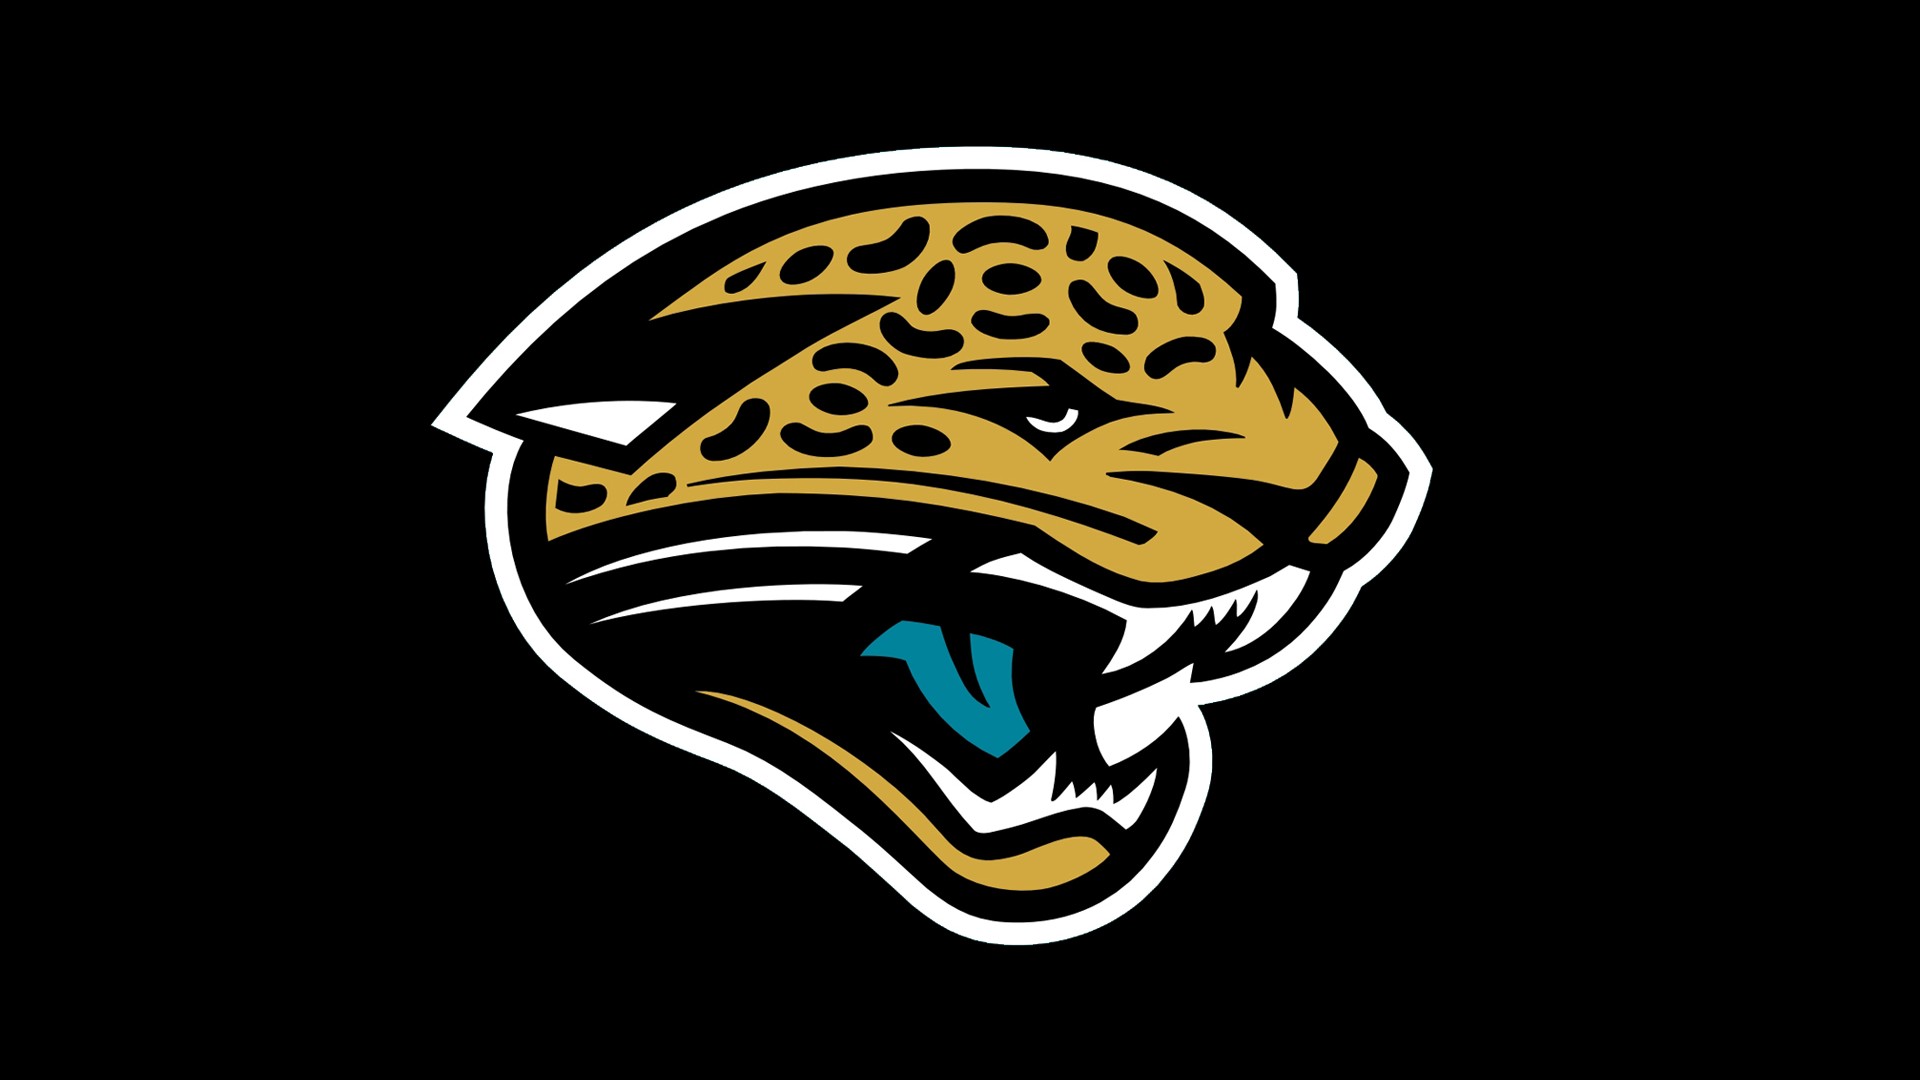 HD Desktop Wallpaper Jacksonville Jaguars With Resolution 1920X1080 pixel. You can make this wallpaper for your Mac or Windows Desktop Background, iPhone, Android or Tablet and another Smartphone device for free